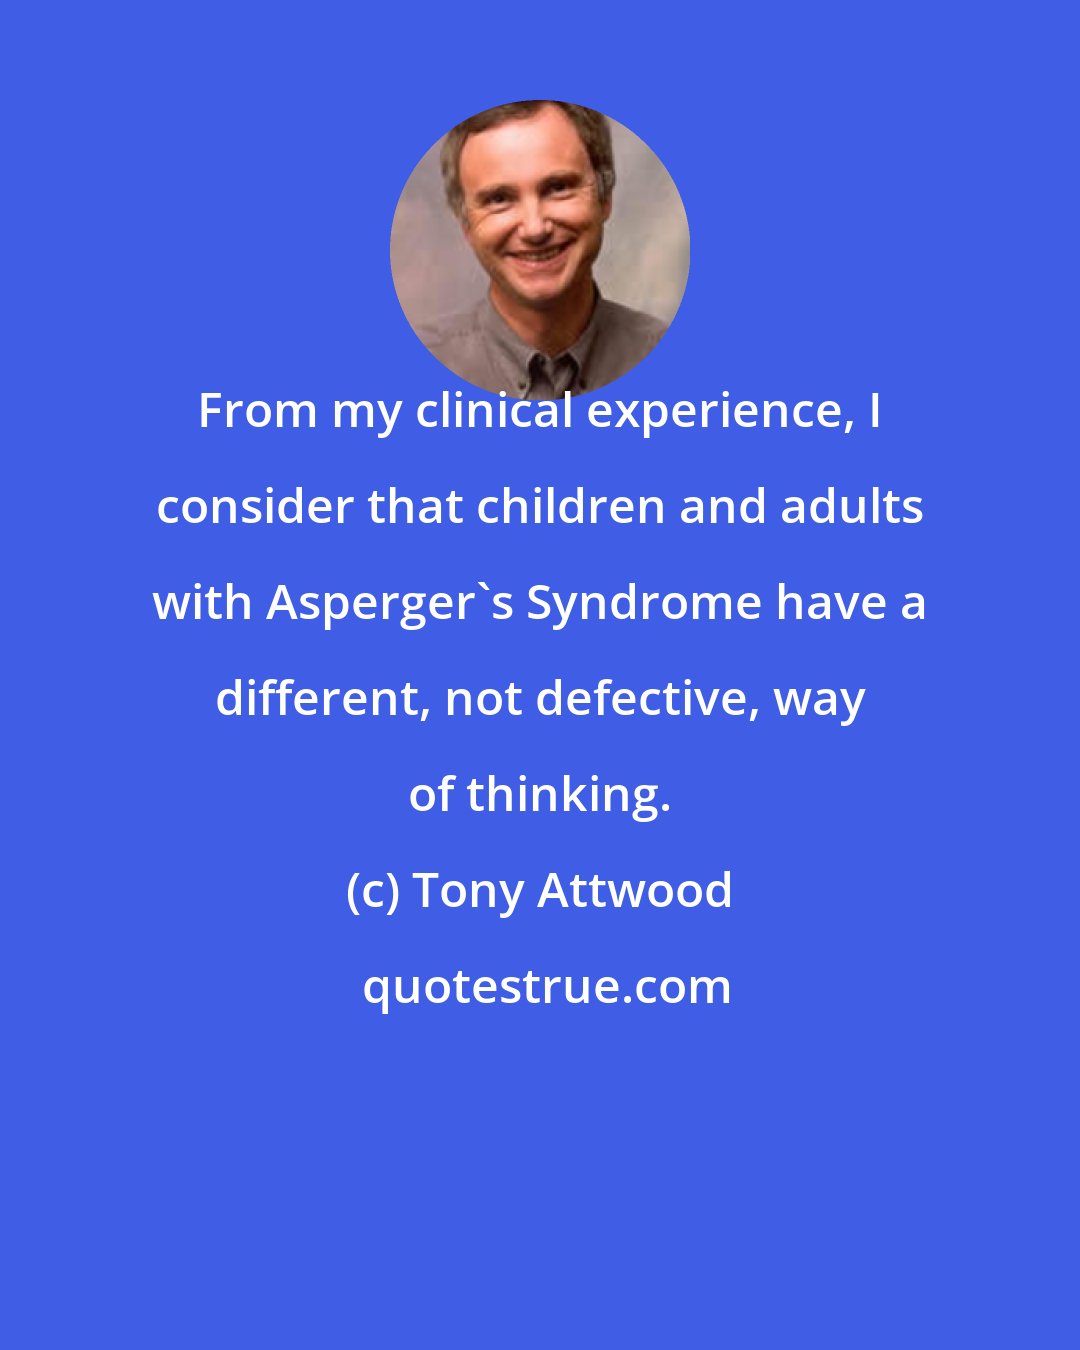 Tony Attwood: From my clinical experience, I consider that children and adults with Asperger's Syndrome have a different, not defective, way of thinking.